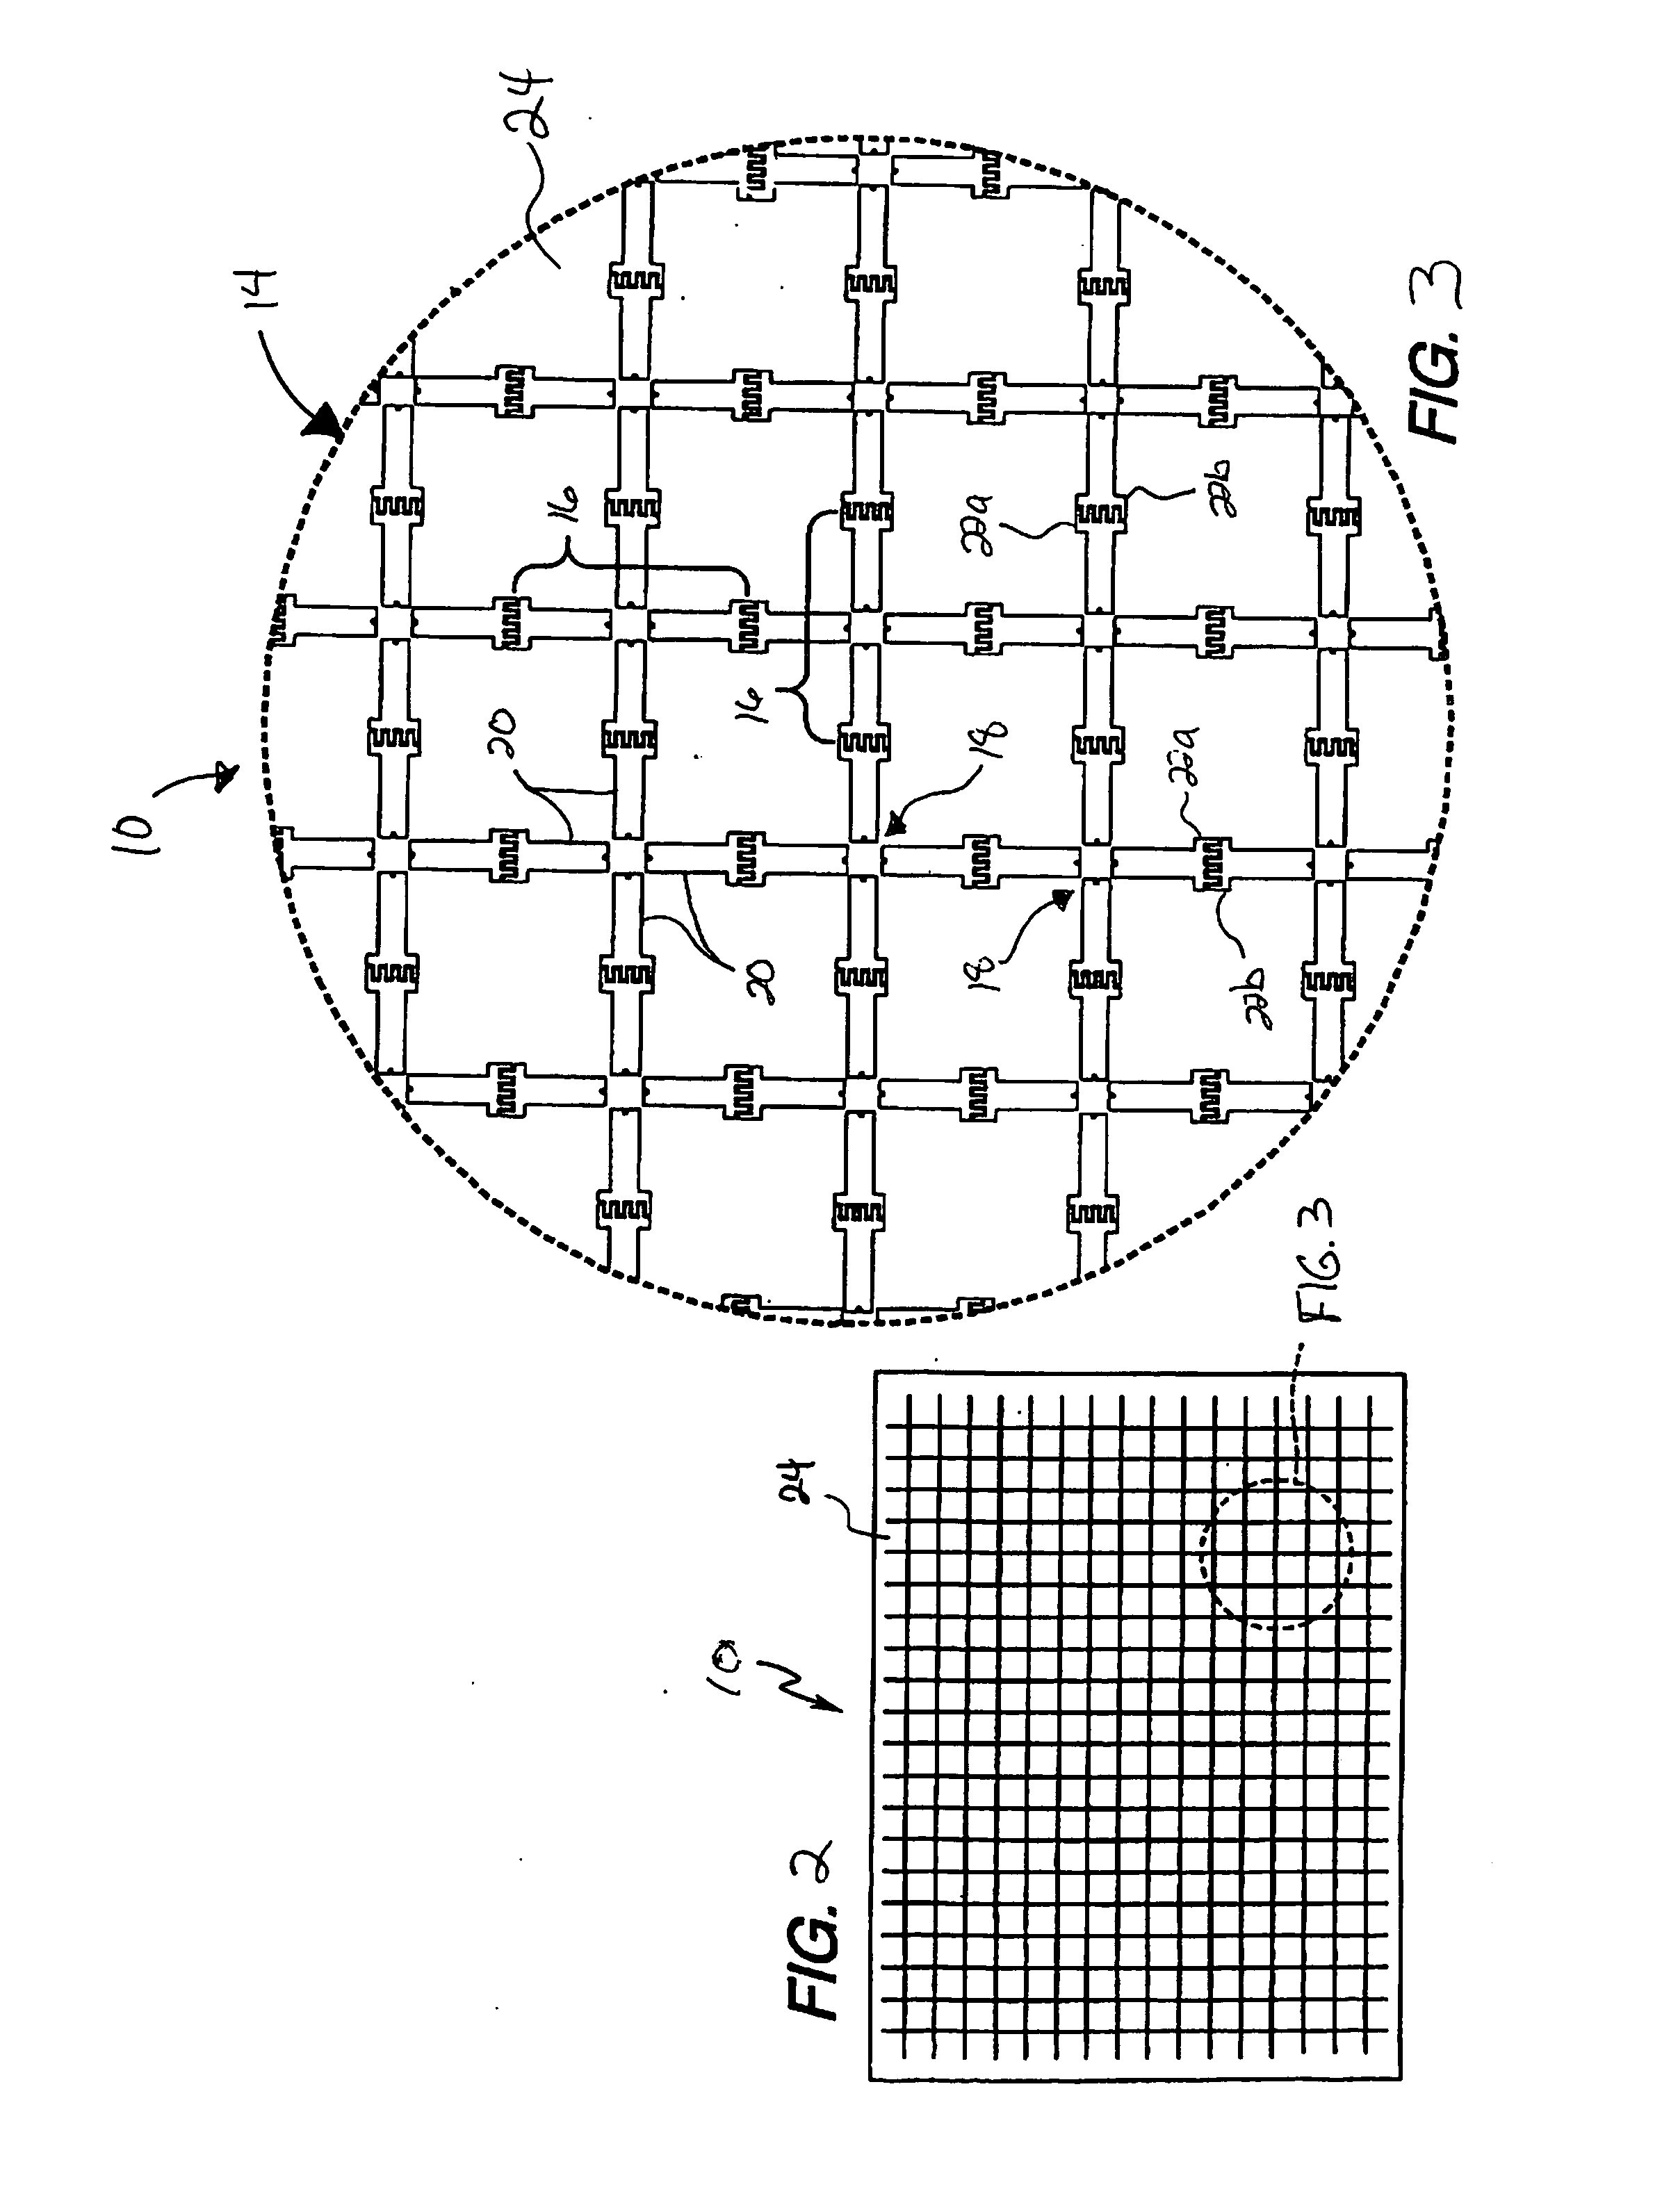 Phased array antenna including transverse circuit boards and associated methods